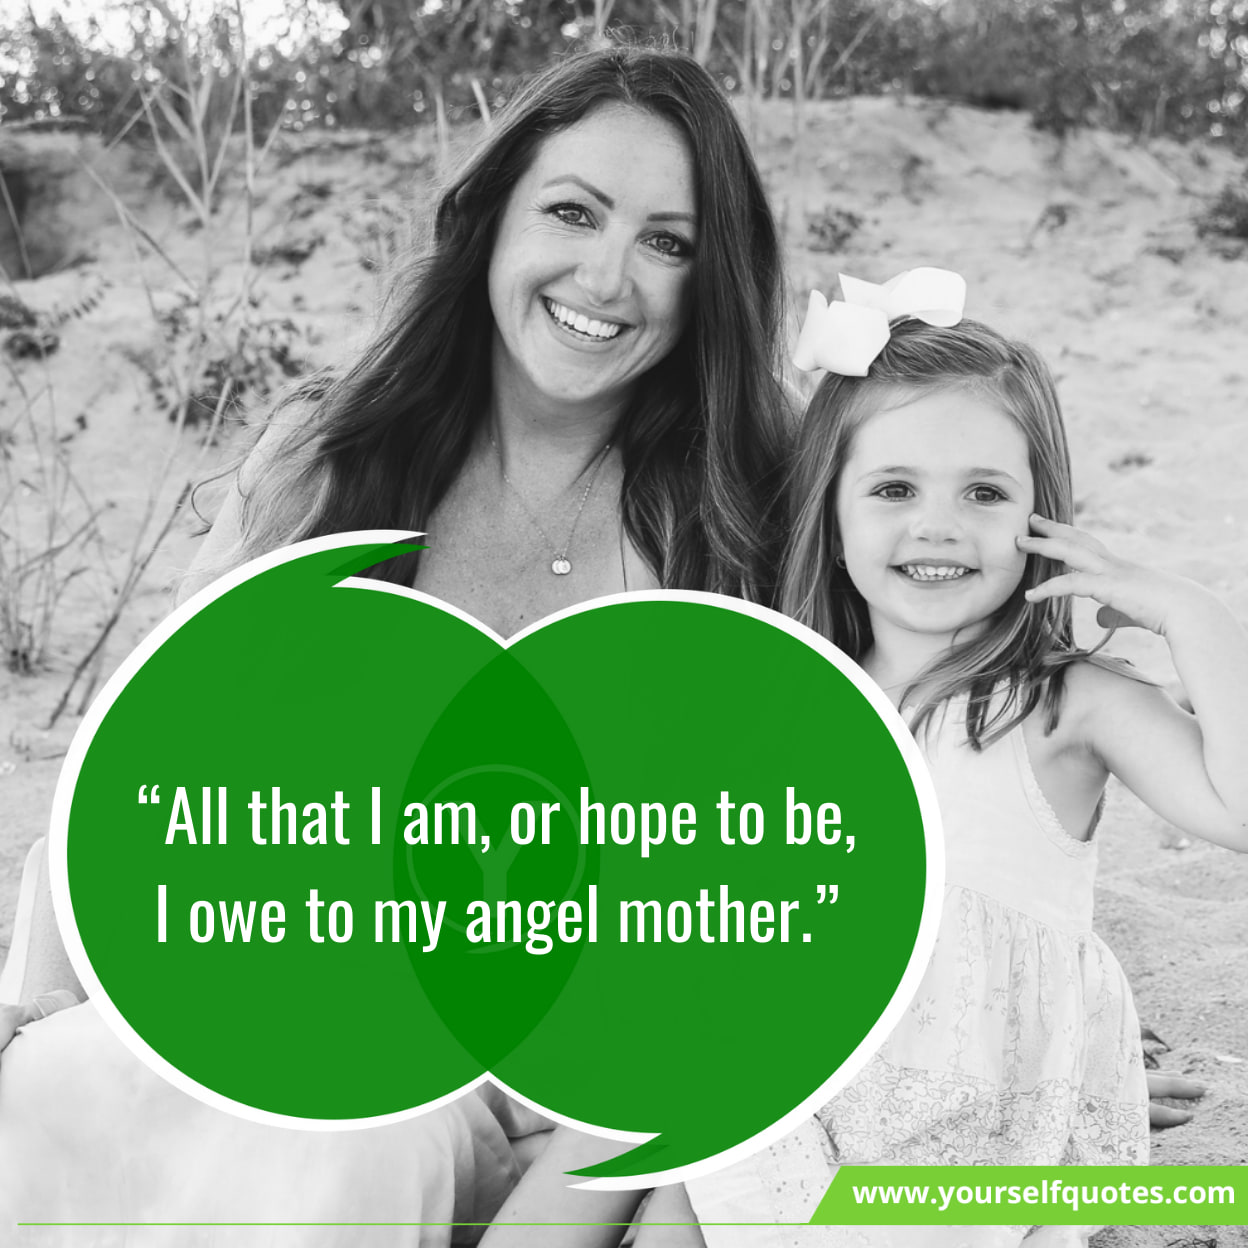 Inspiring Quotes About Mother-Daughter